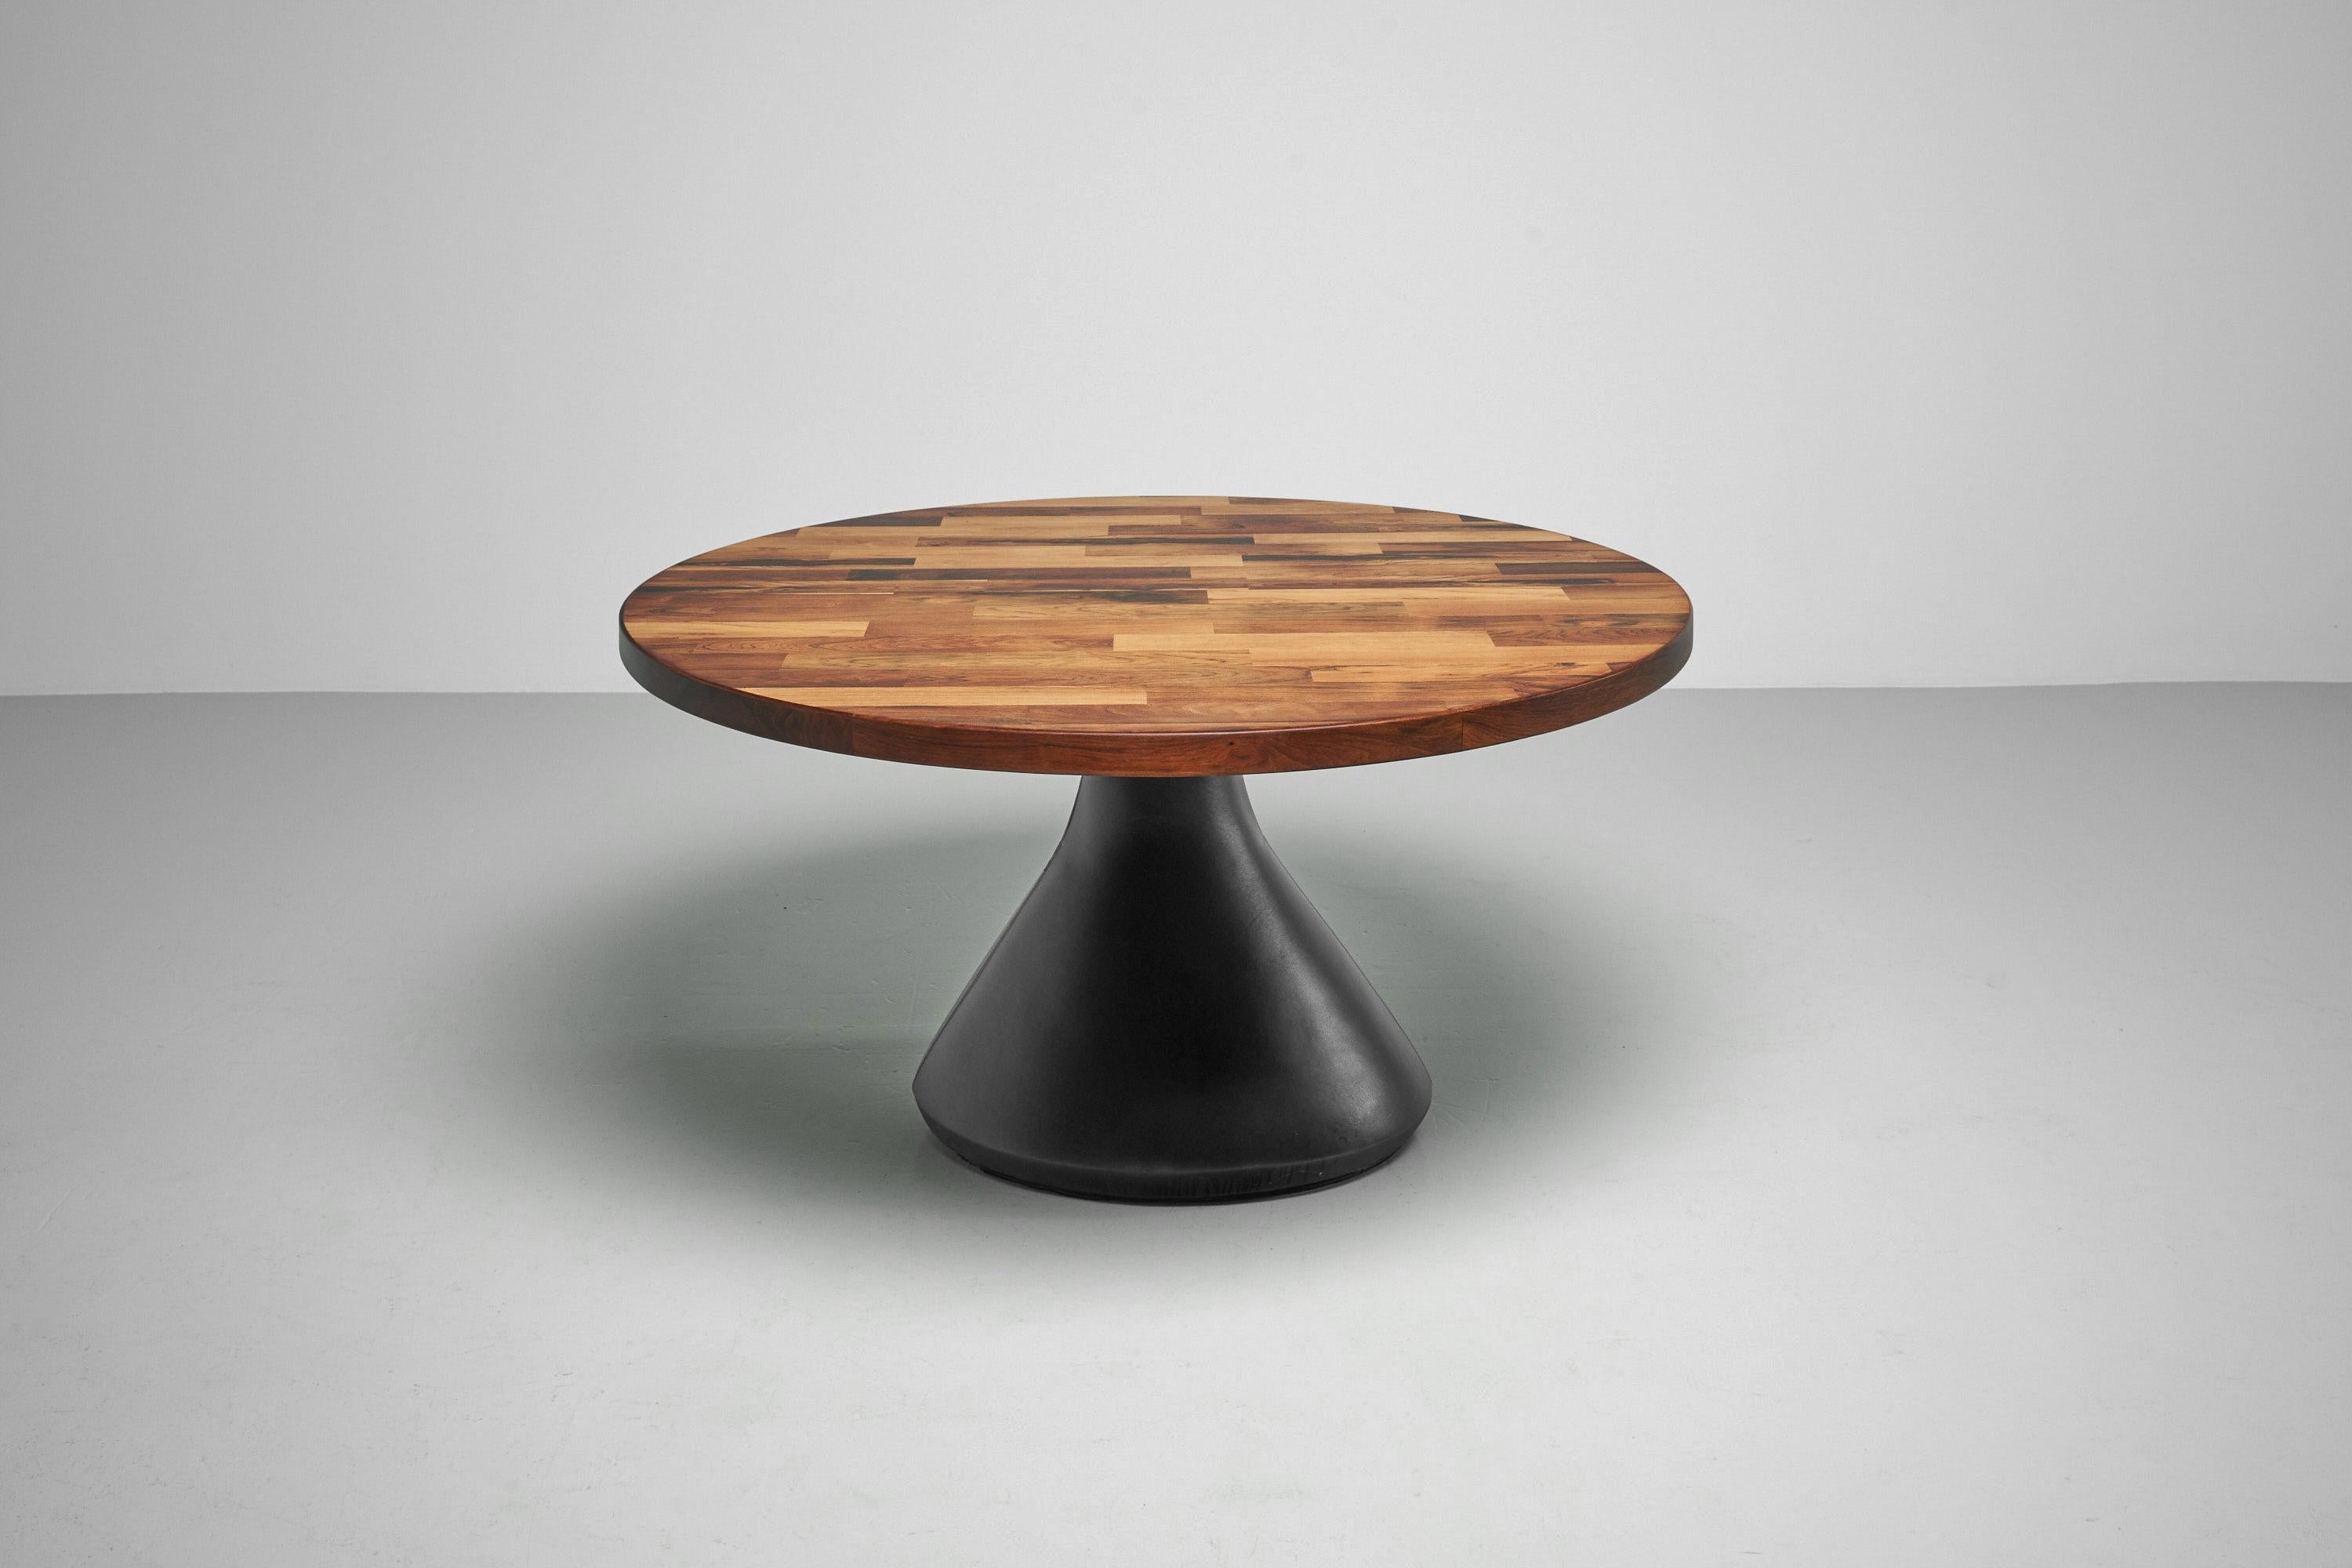 Brutalist so called Guaruja round pedestal table designed by Jorge Zalszupin and manufactured by his own company l’Atelier, Brazil 1959. This stunning large dining table has a rosewood patchwork top supported by a solid concrete base, covered with